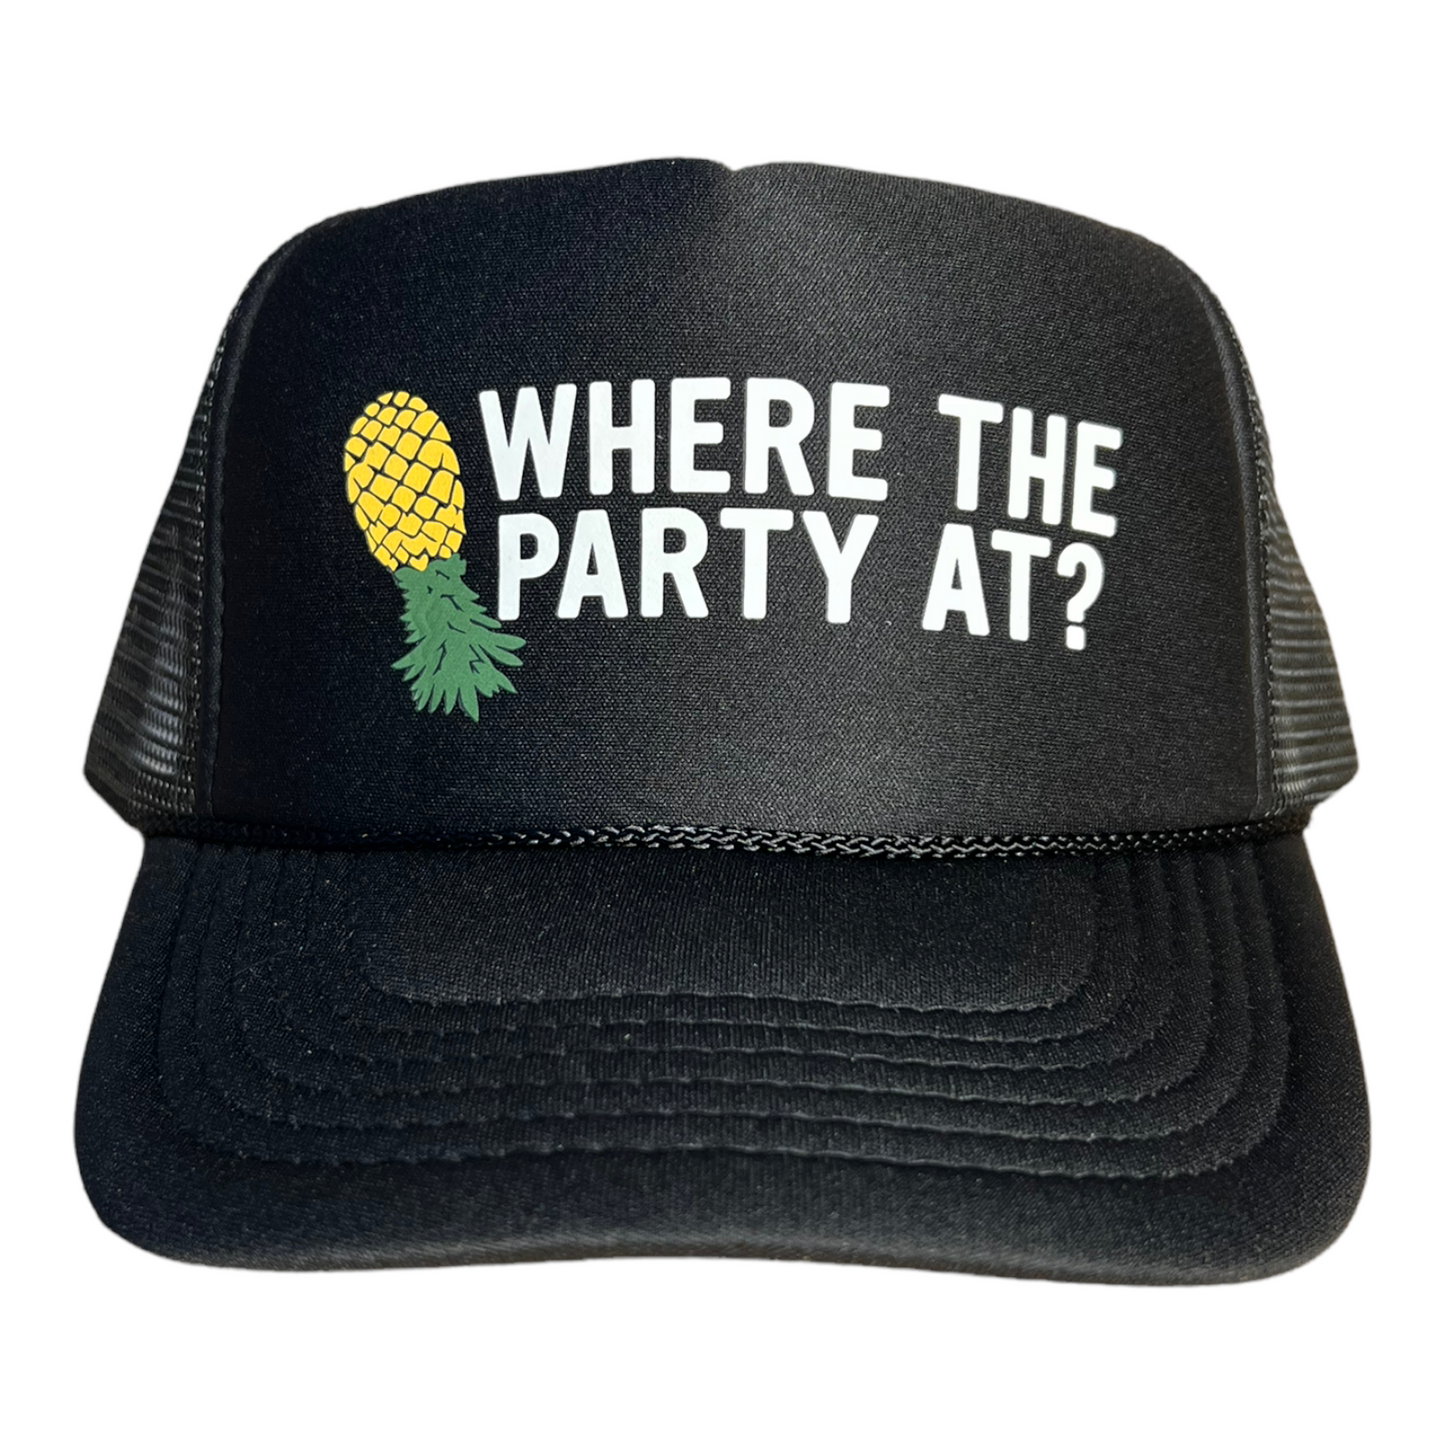 Where The Party At Trucker Hat Upside Down Pineapple Hat Funny Trucker Hat Black